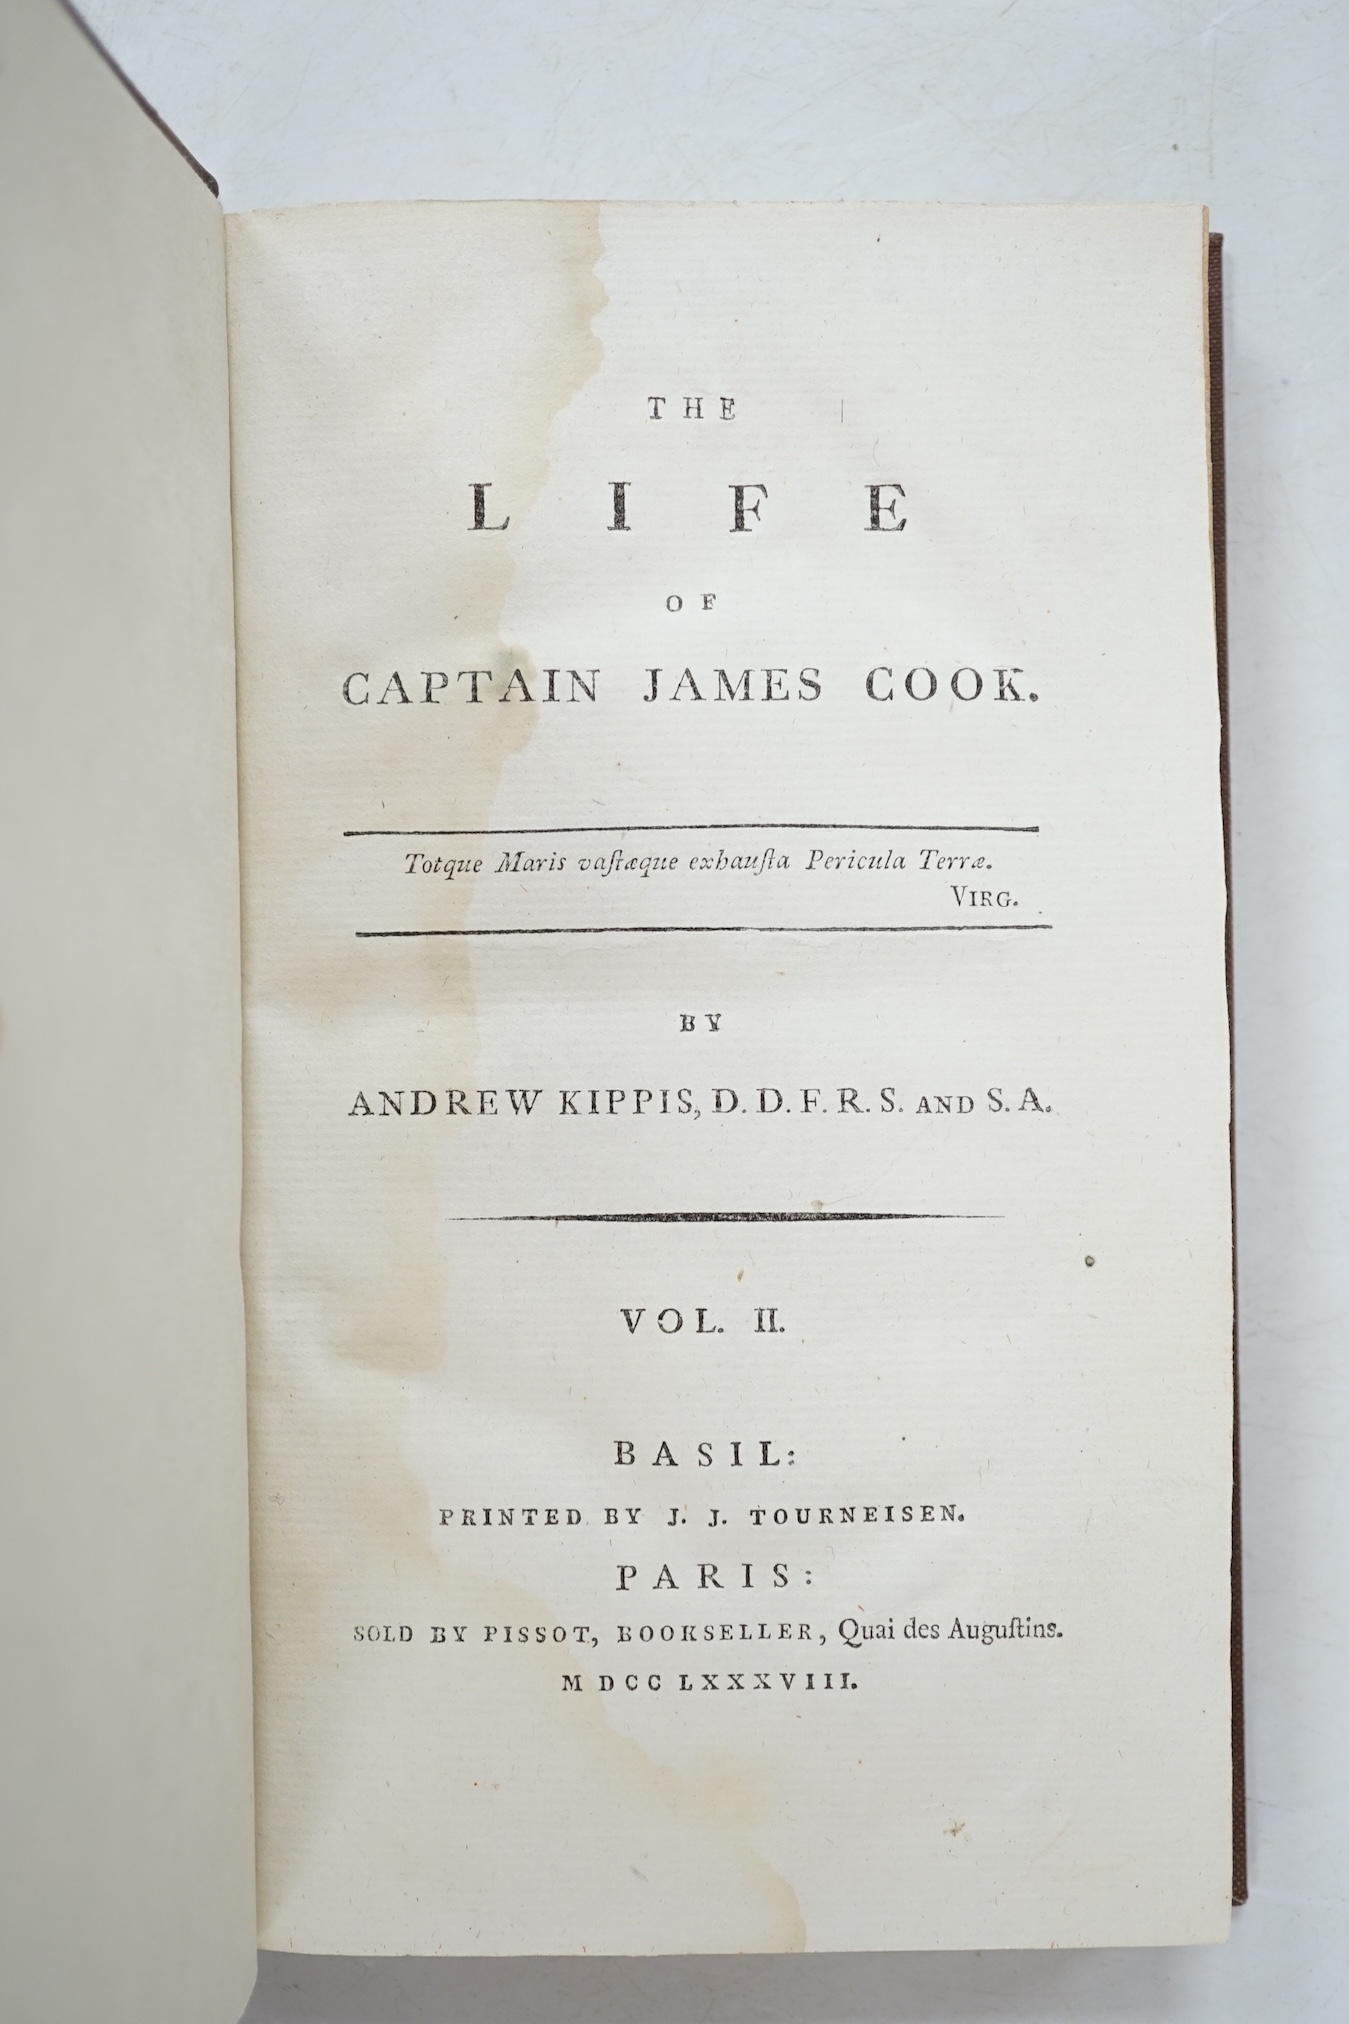 Kippis, Andrew - The Life of Captain James Cook. 2 vols. newly rebound quarter calf and cloth, gilt panelled spines. Basil printed by J.J. Tourneisen, 1788